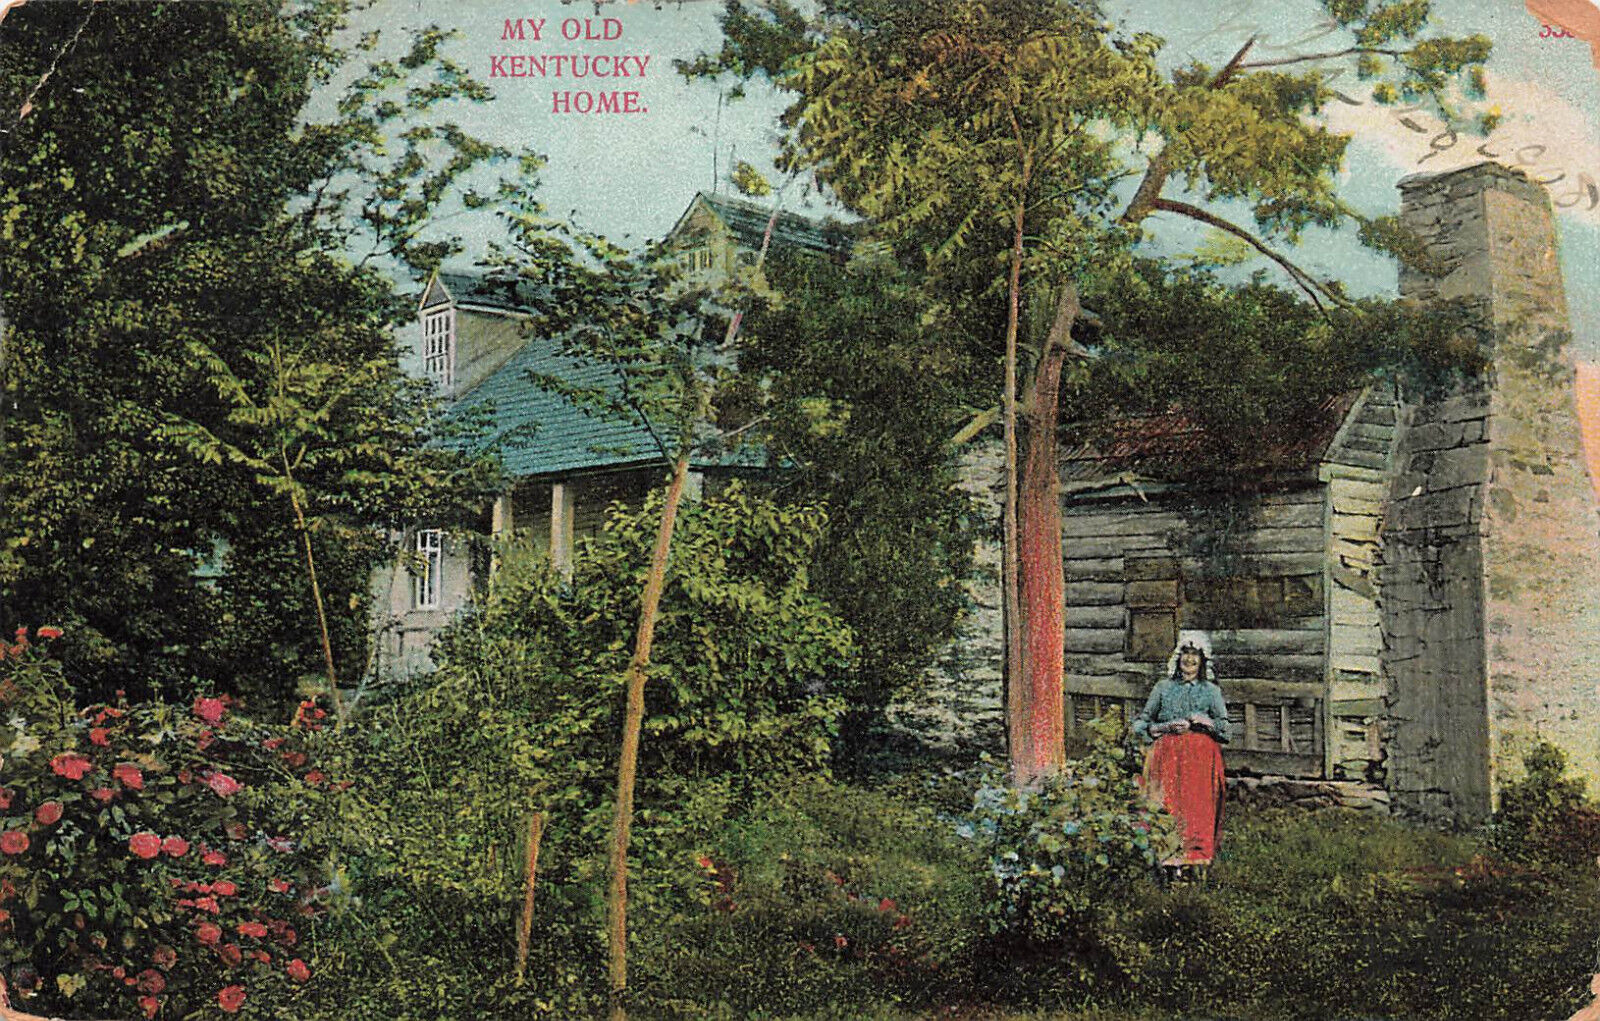 WOMAN IN FRONT OF MY OLD KENTUCKY HOME GREETING POSTCARD RICHMOND KENTUCKY 1908